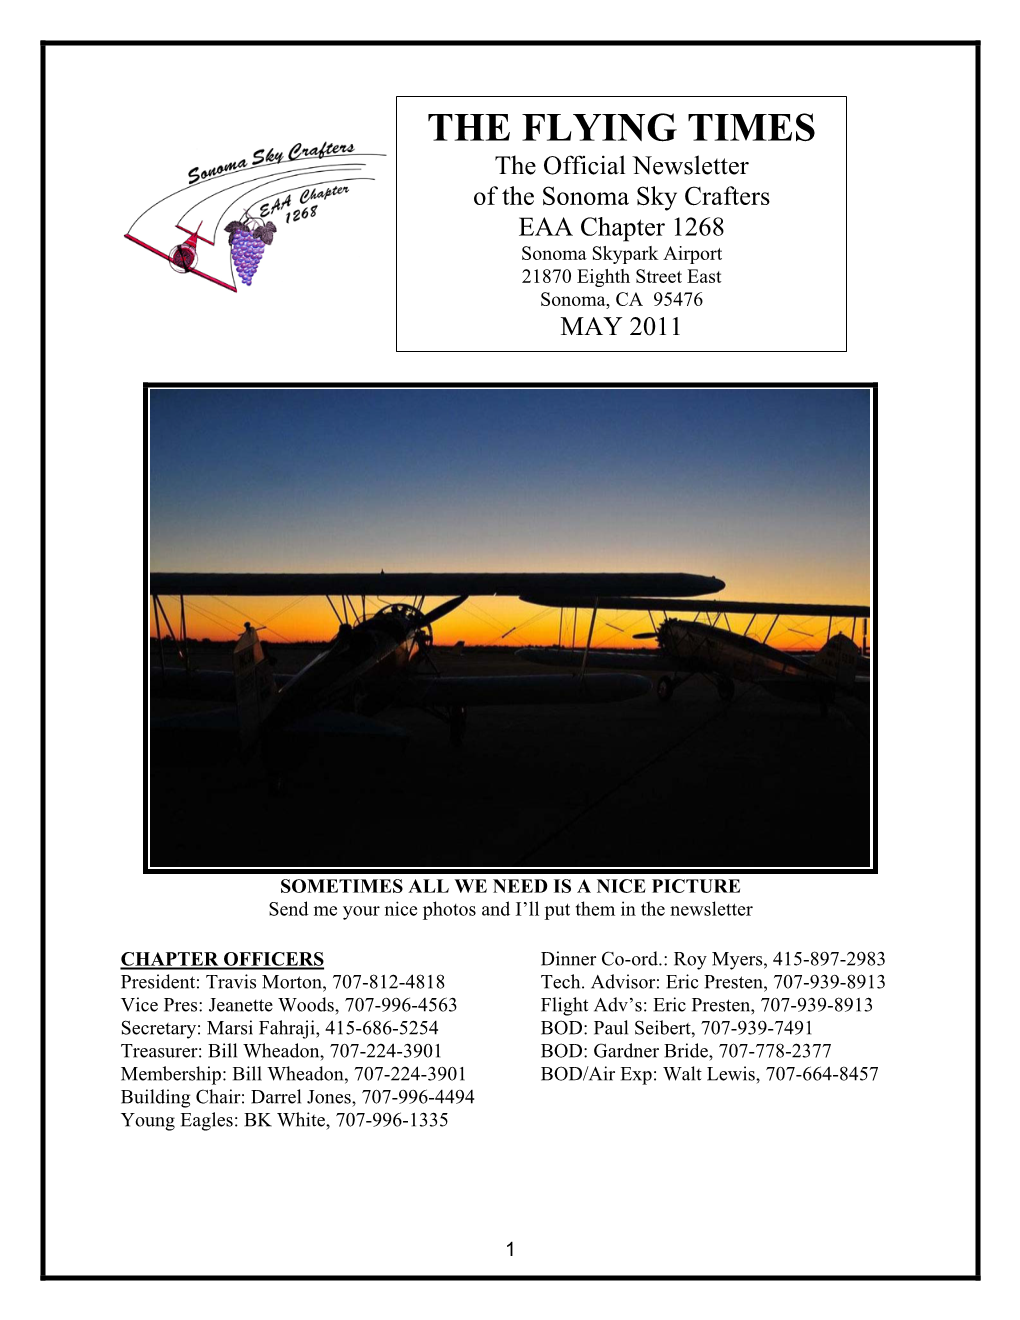 THE FLYING TIMES the Official Newsletter of the Sonoma Sky Crafters EAA Chapter 1268 Sonoma Skypark Airport 21870 Eighth Street East Sonoma, CA 95476 MAY 2011